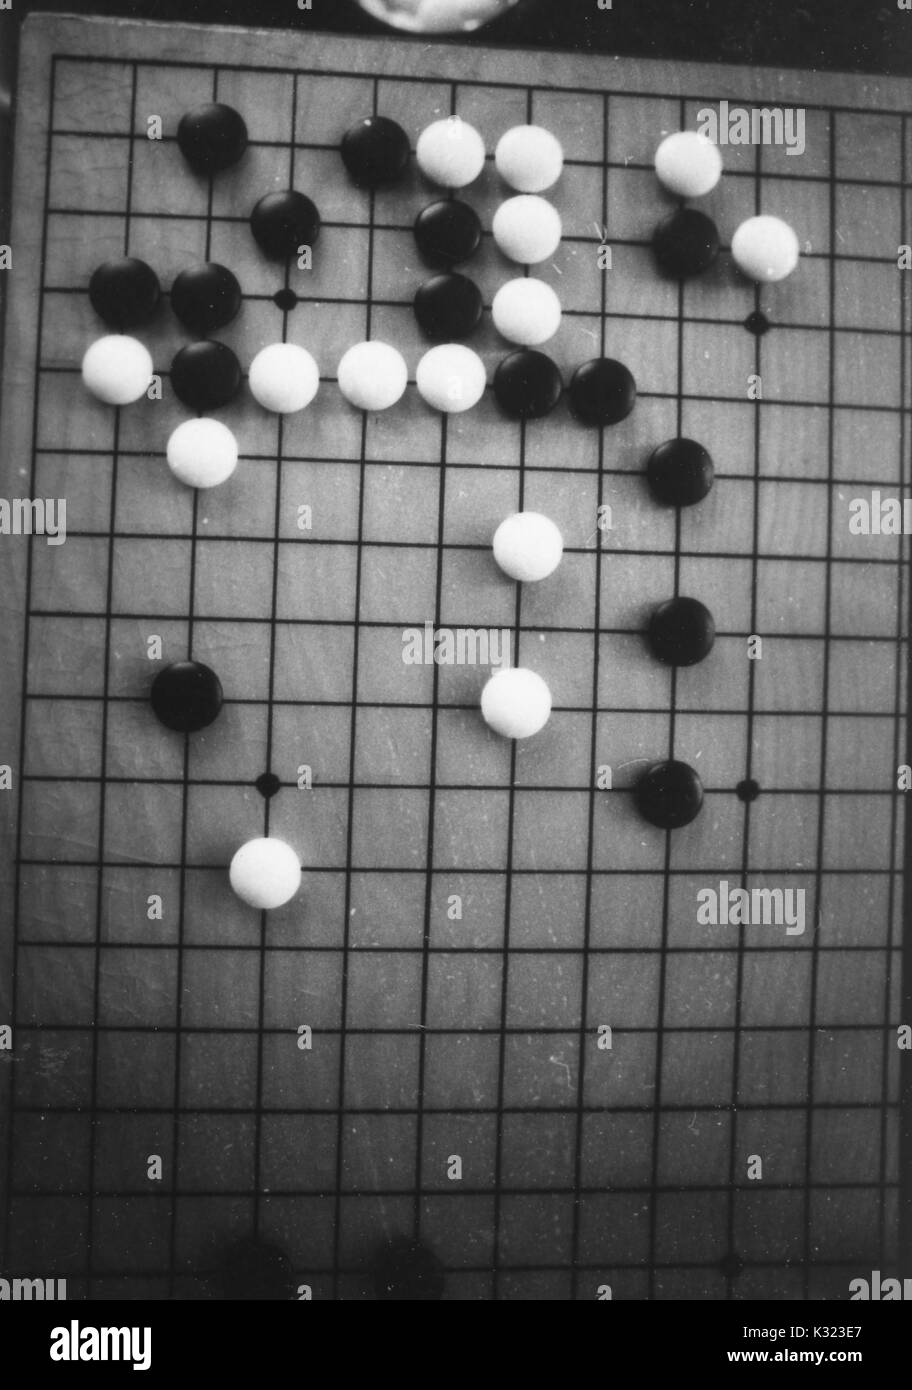 The board during a game of Go, an old Asian strategy game, with white and black stones arranged on the grid, 1950. Stock Photo